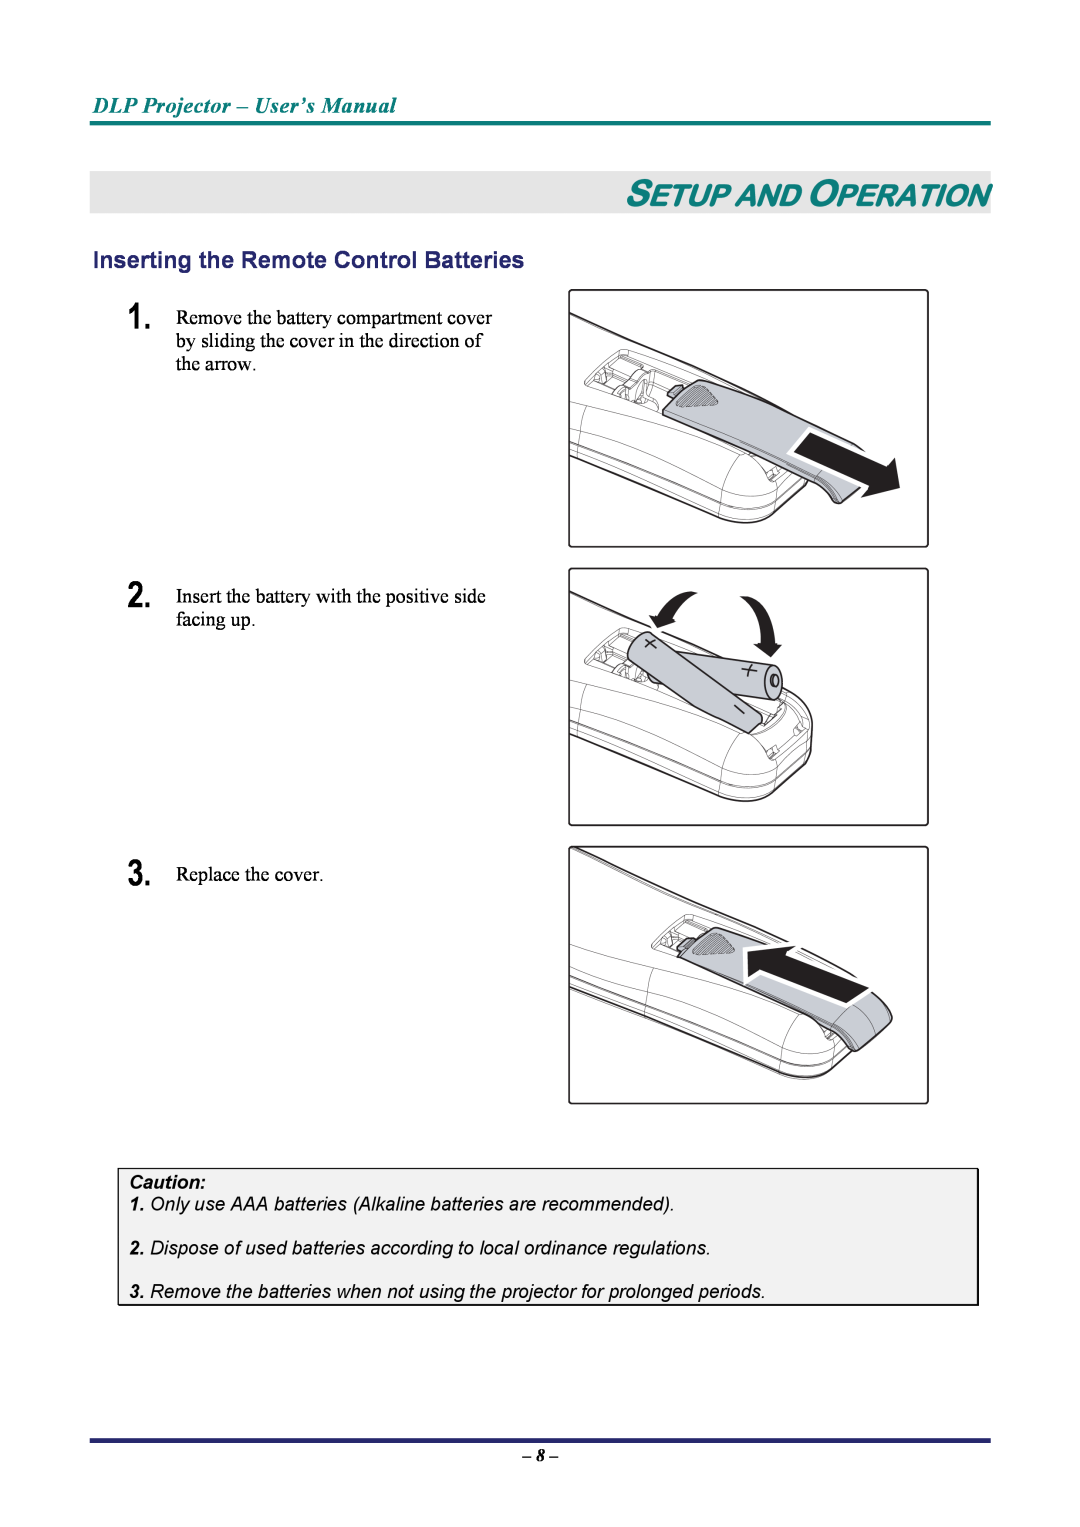 Vivitek D7 user manual Setup And Operation, Inserting the Remote Control Batteries, DLP Projector - User’s Manual 